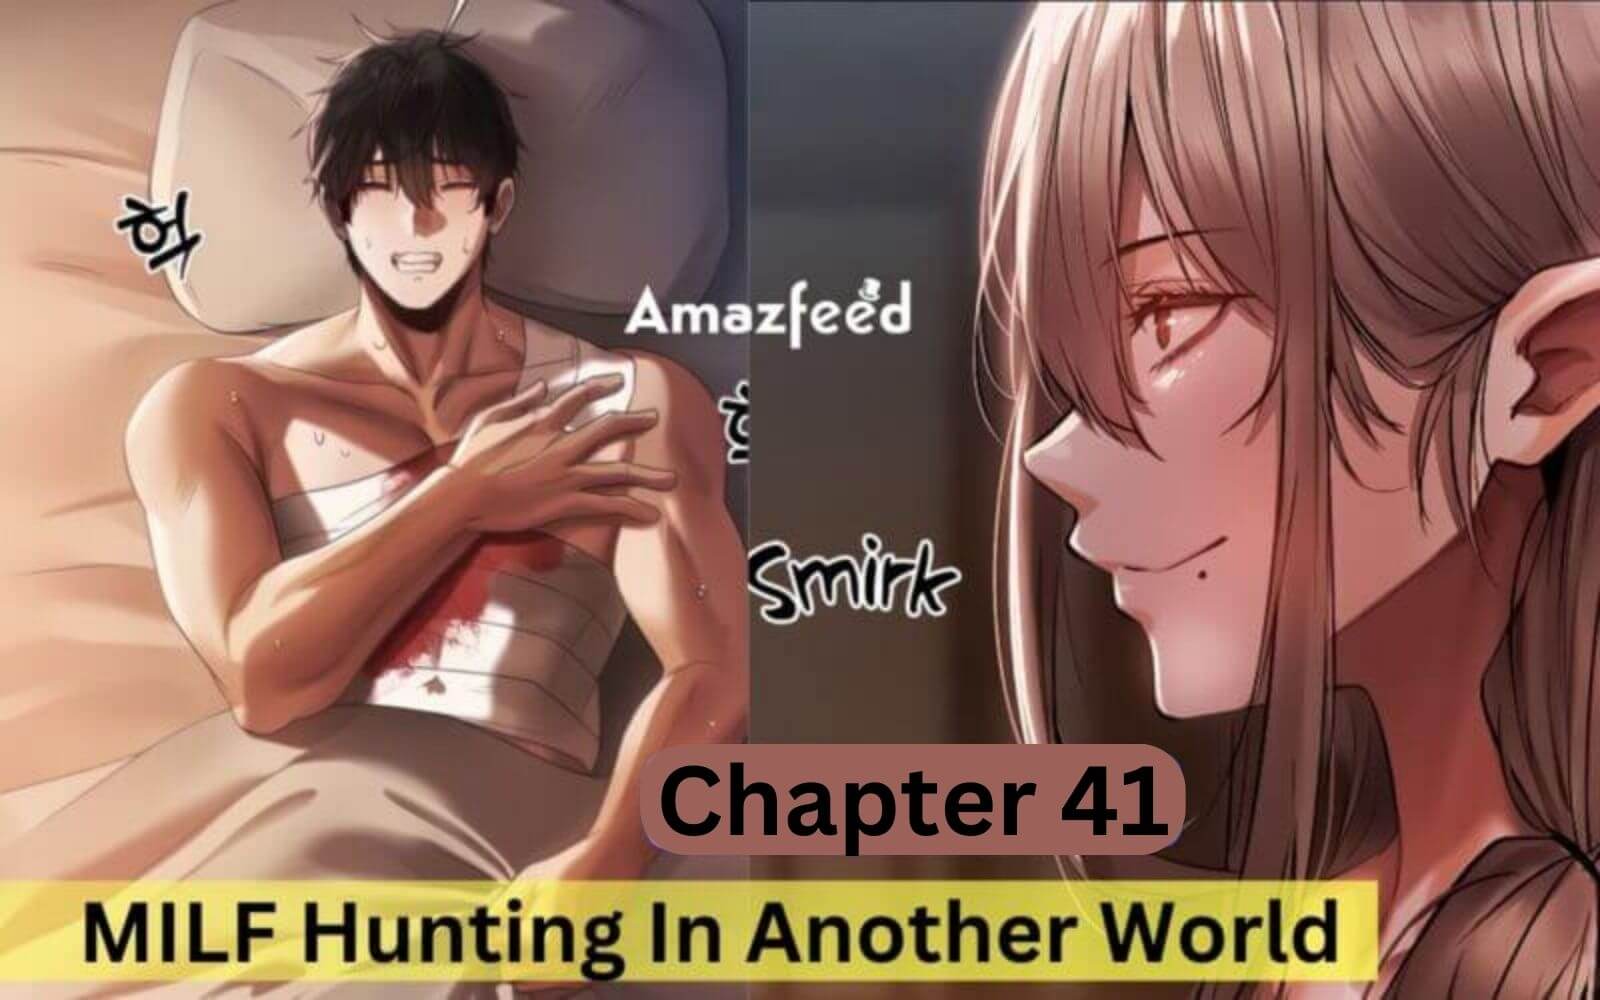 MILF Hunting In Another World Chapter 41 Reddit Spoiler